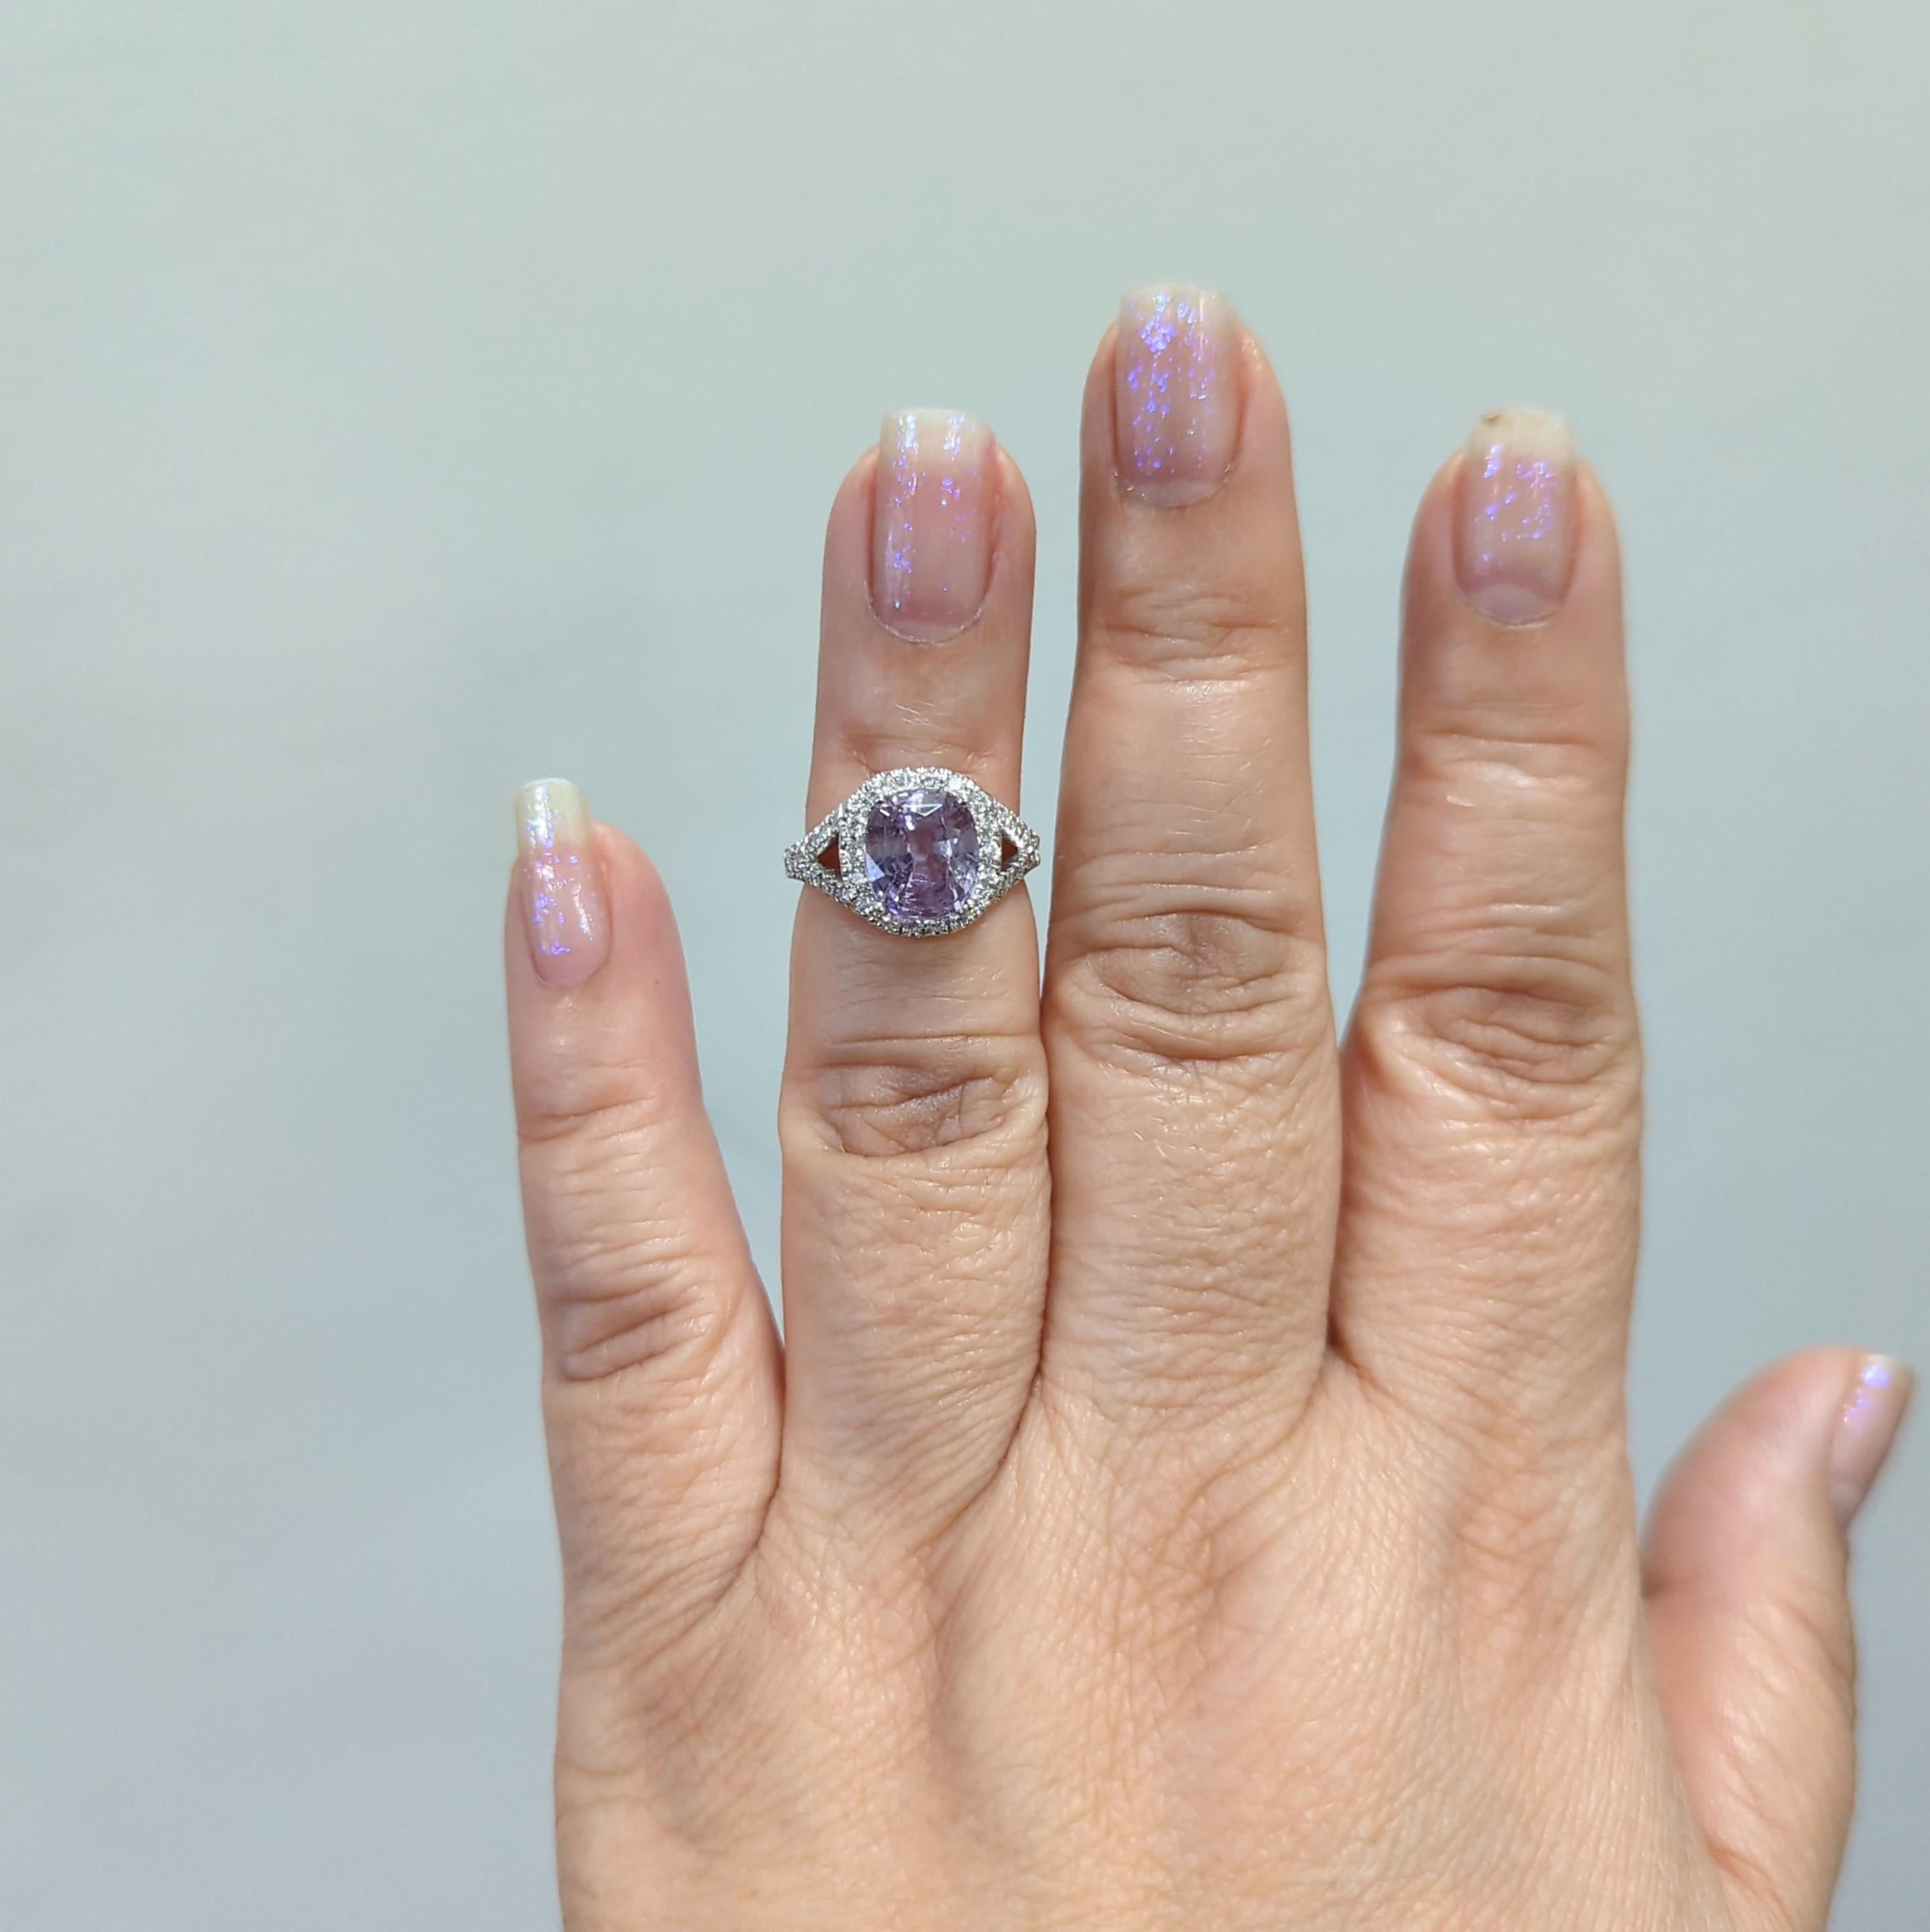 Beautiful lavender 3.53 ct. spinel cushion with 0.84 ct. good quality white diamond rounds.  Handmade in platinum.  Ring size 4.25.